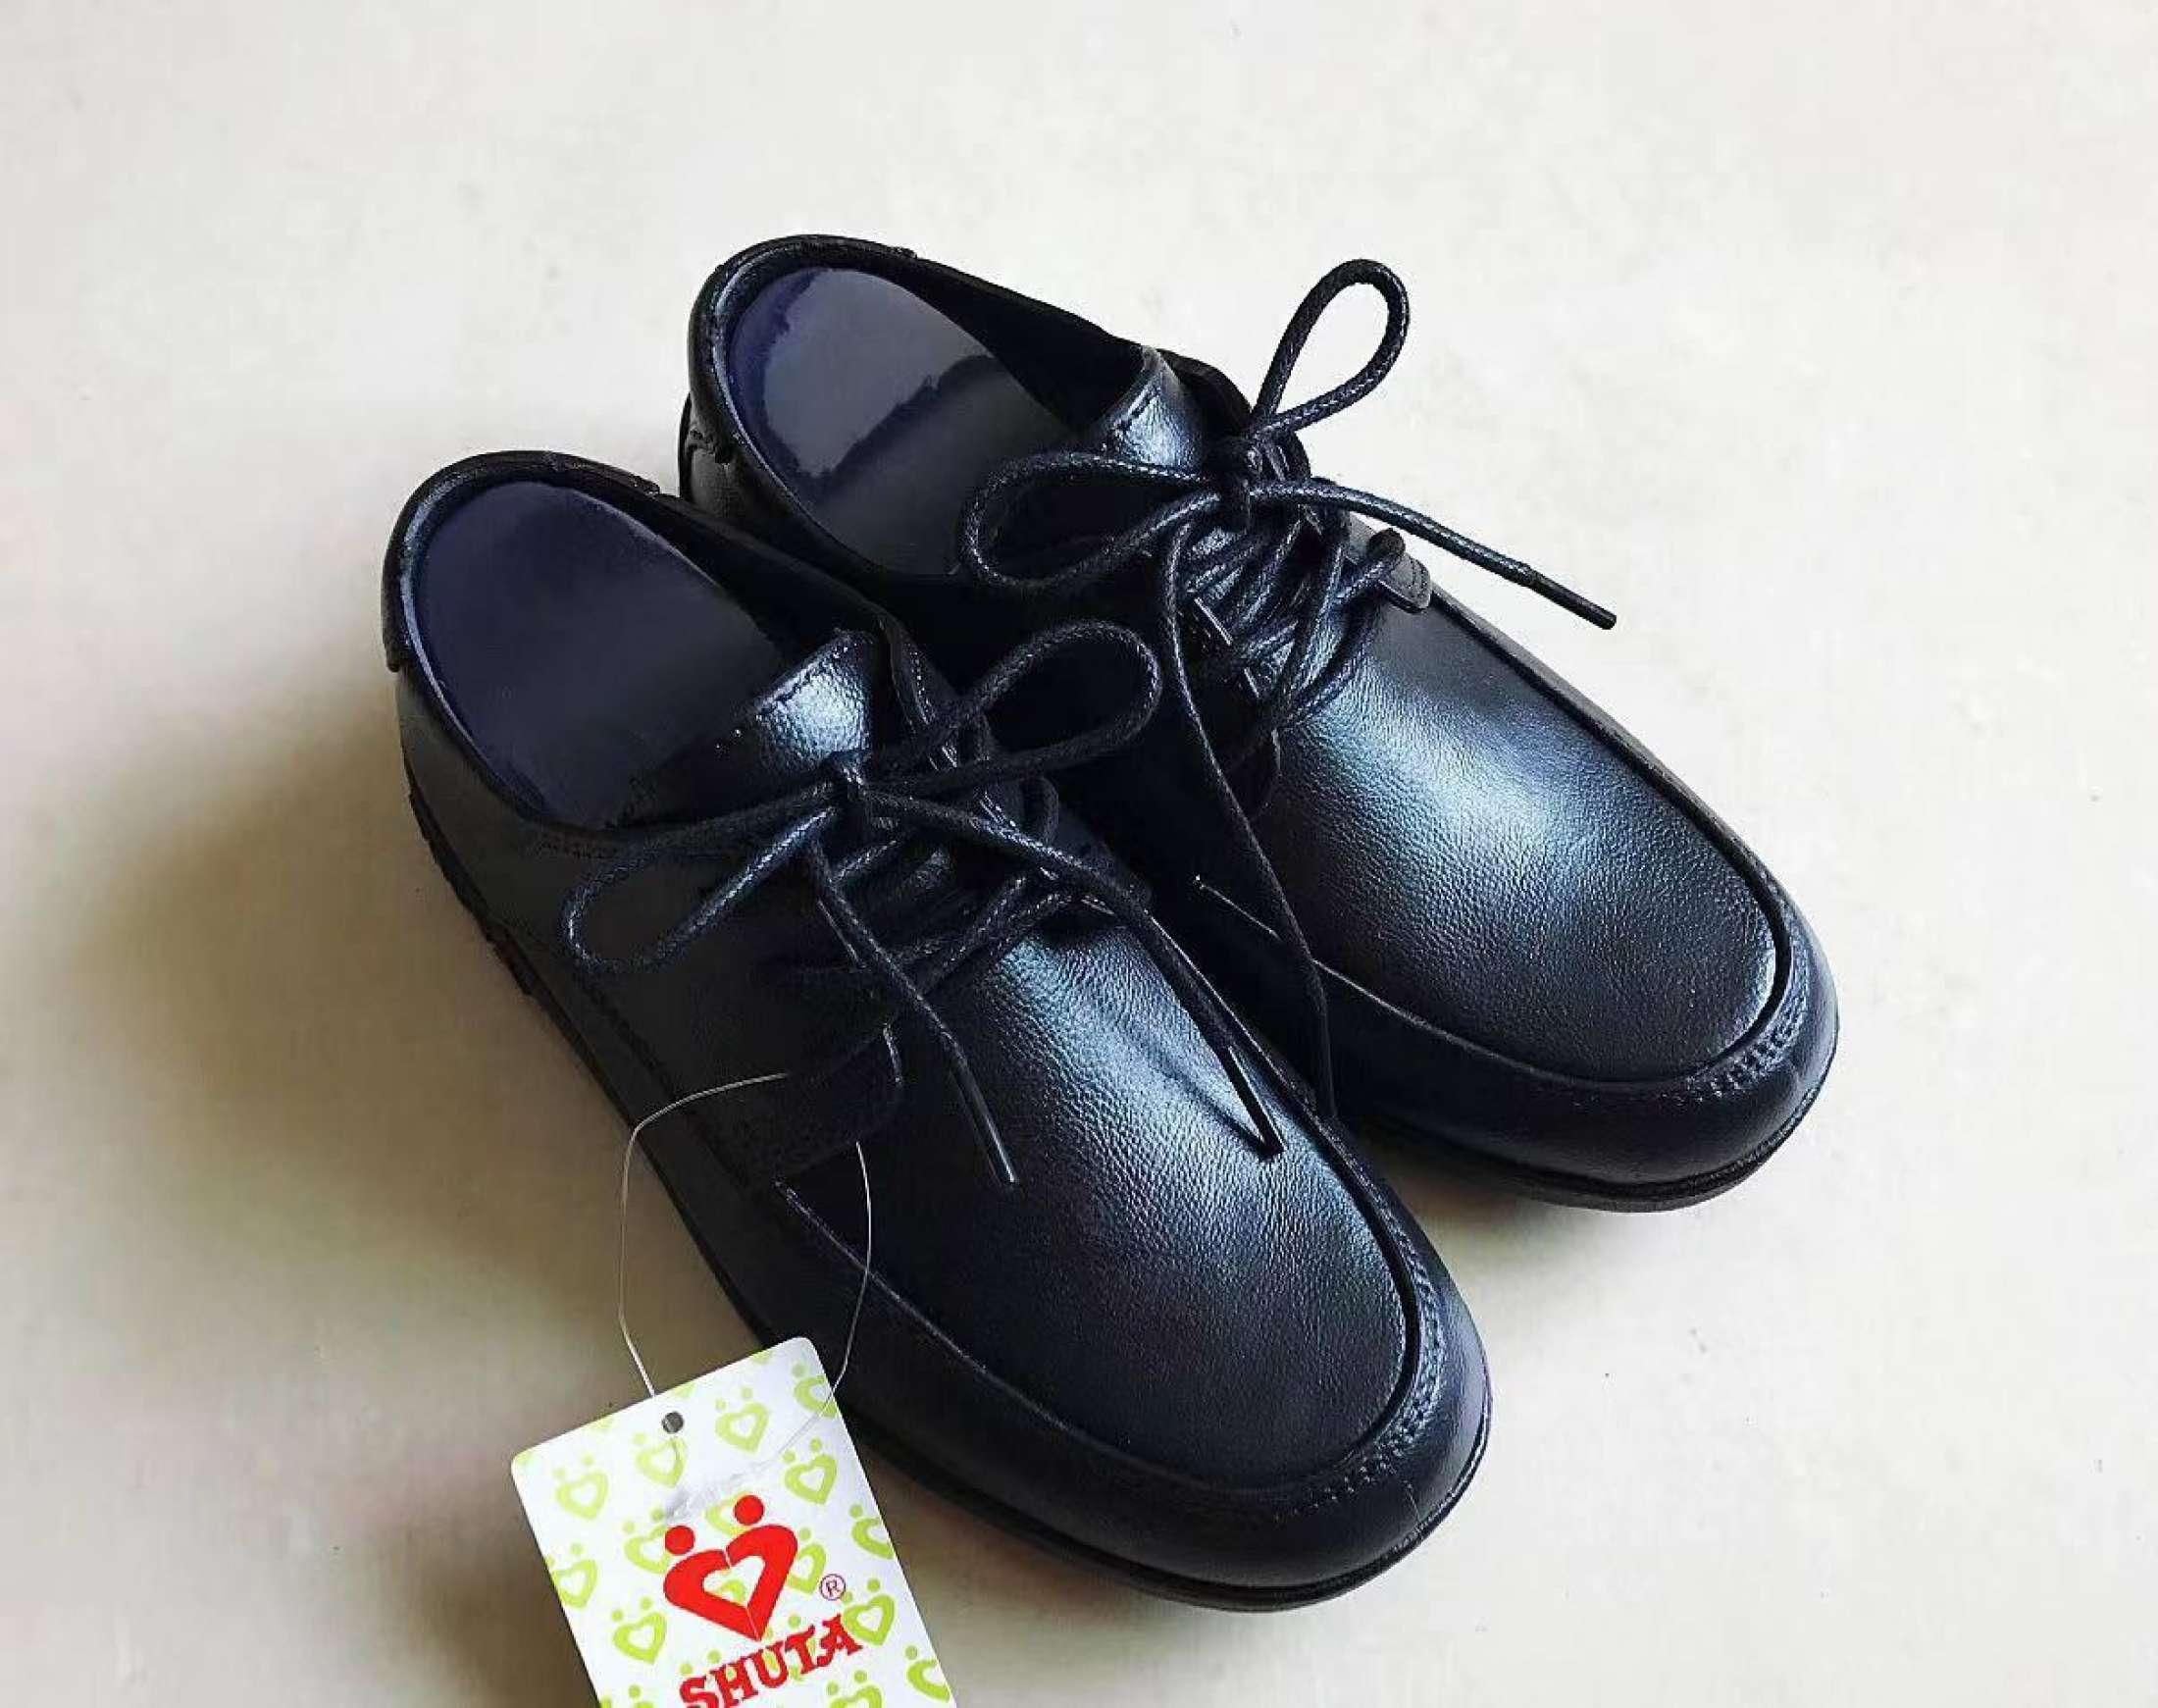 youth boys school shoes